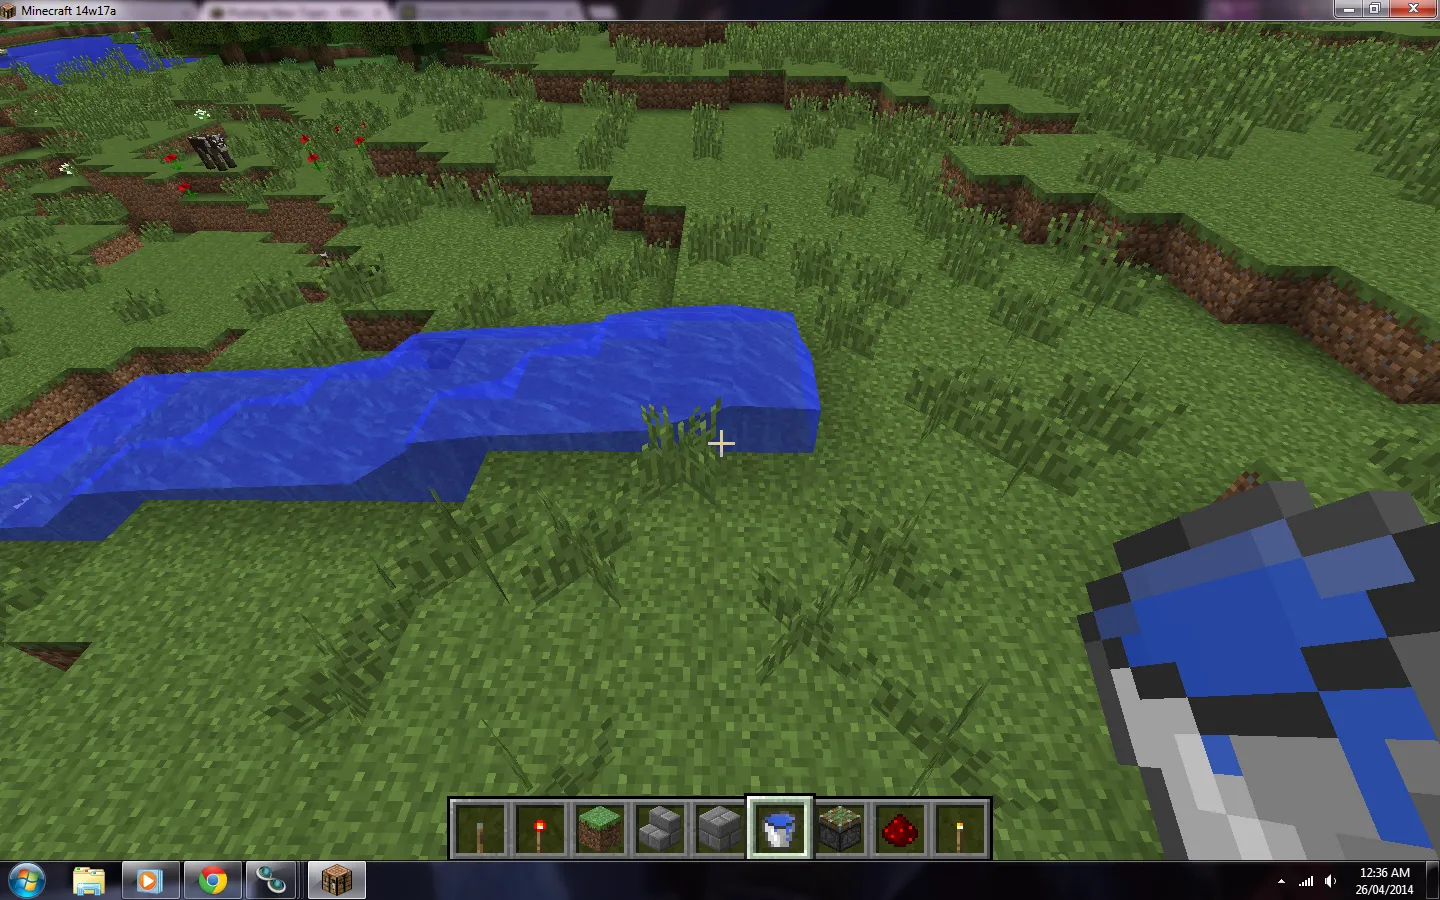 An image of a player using a water bucket in Minecraft